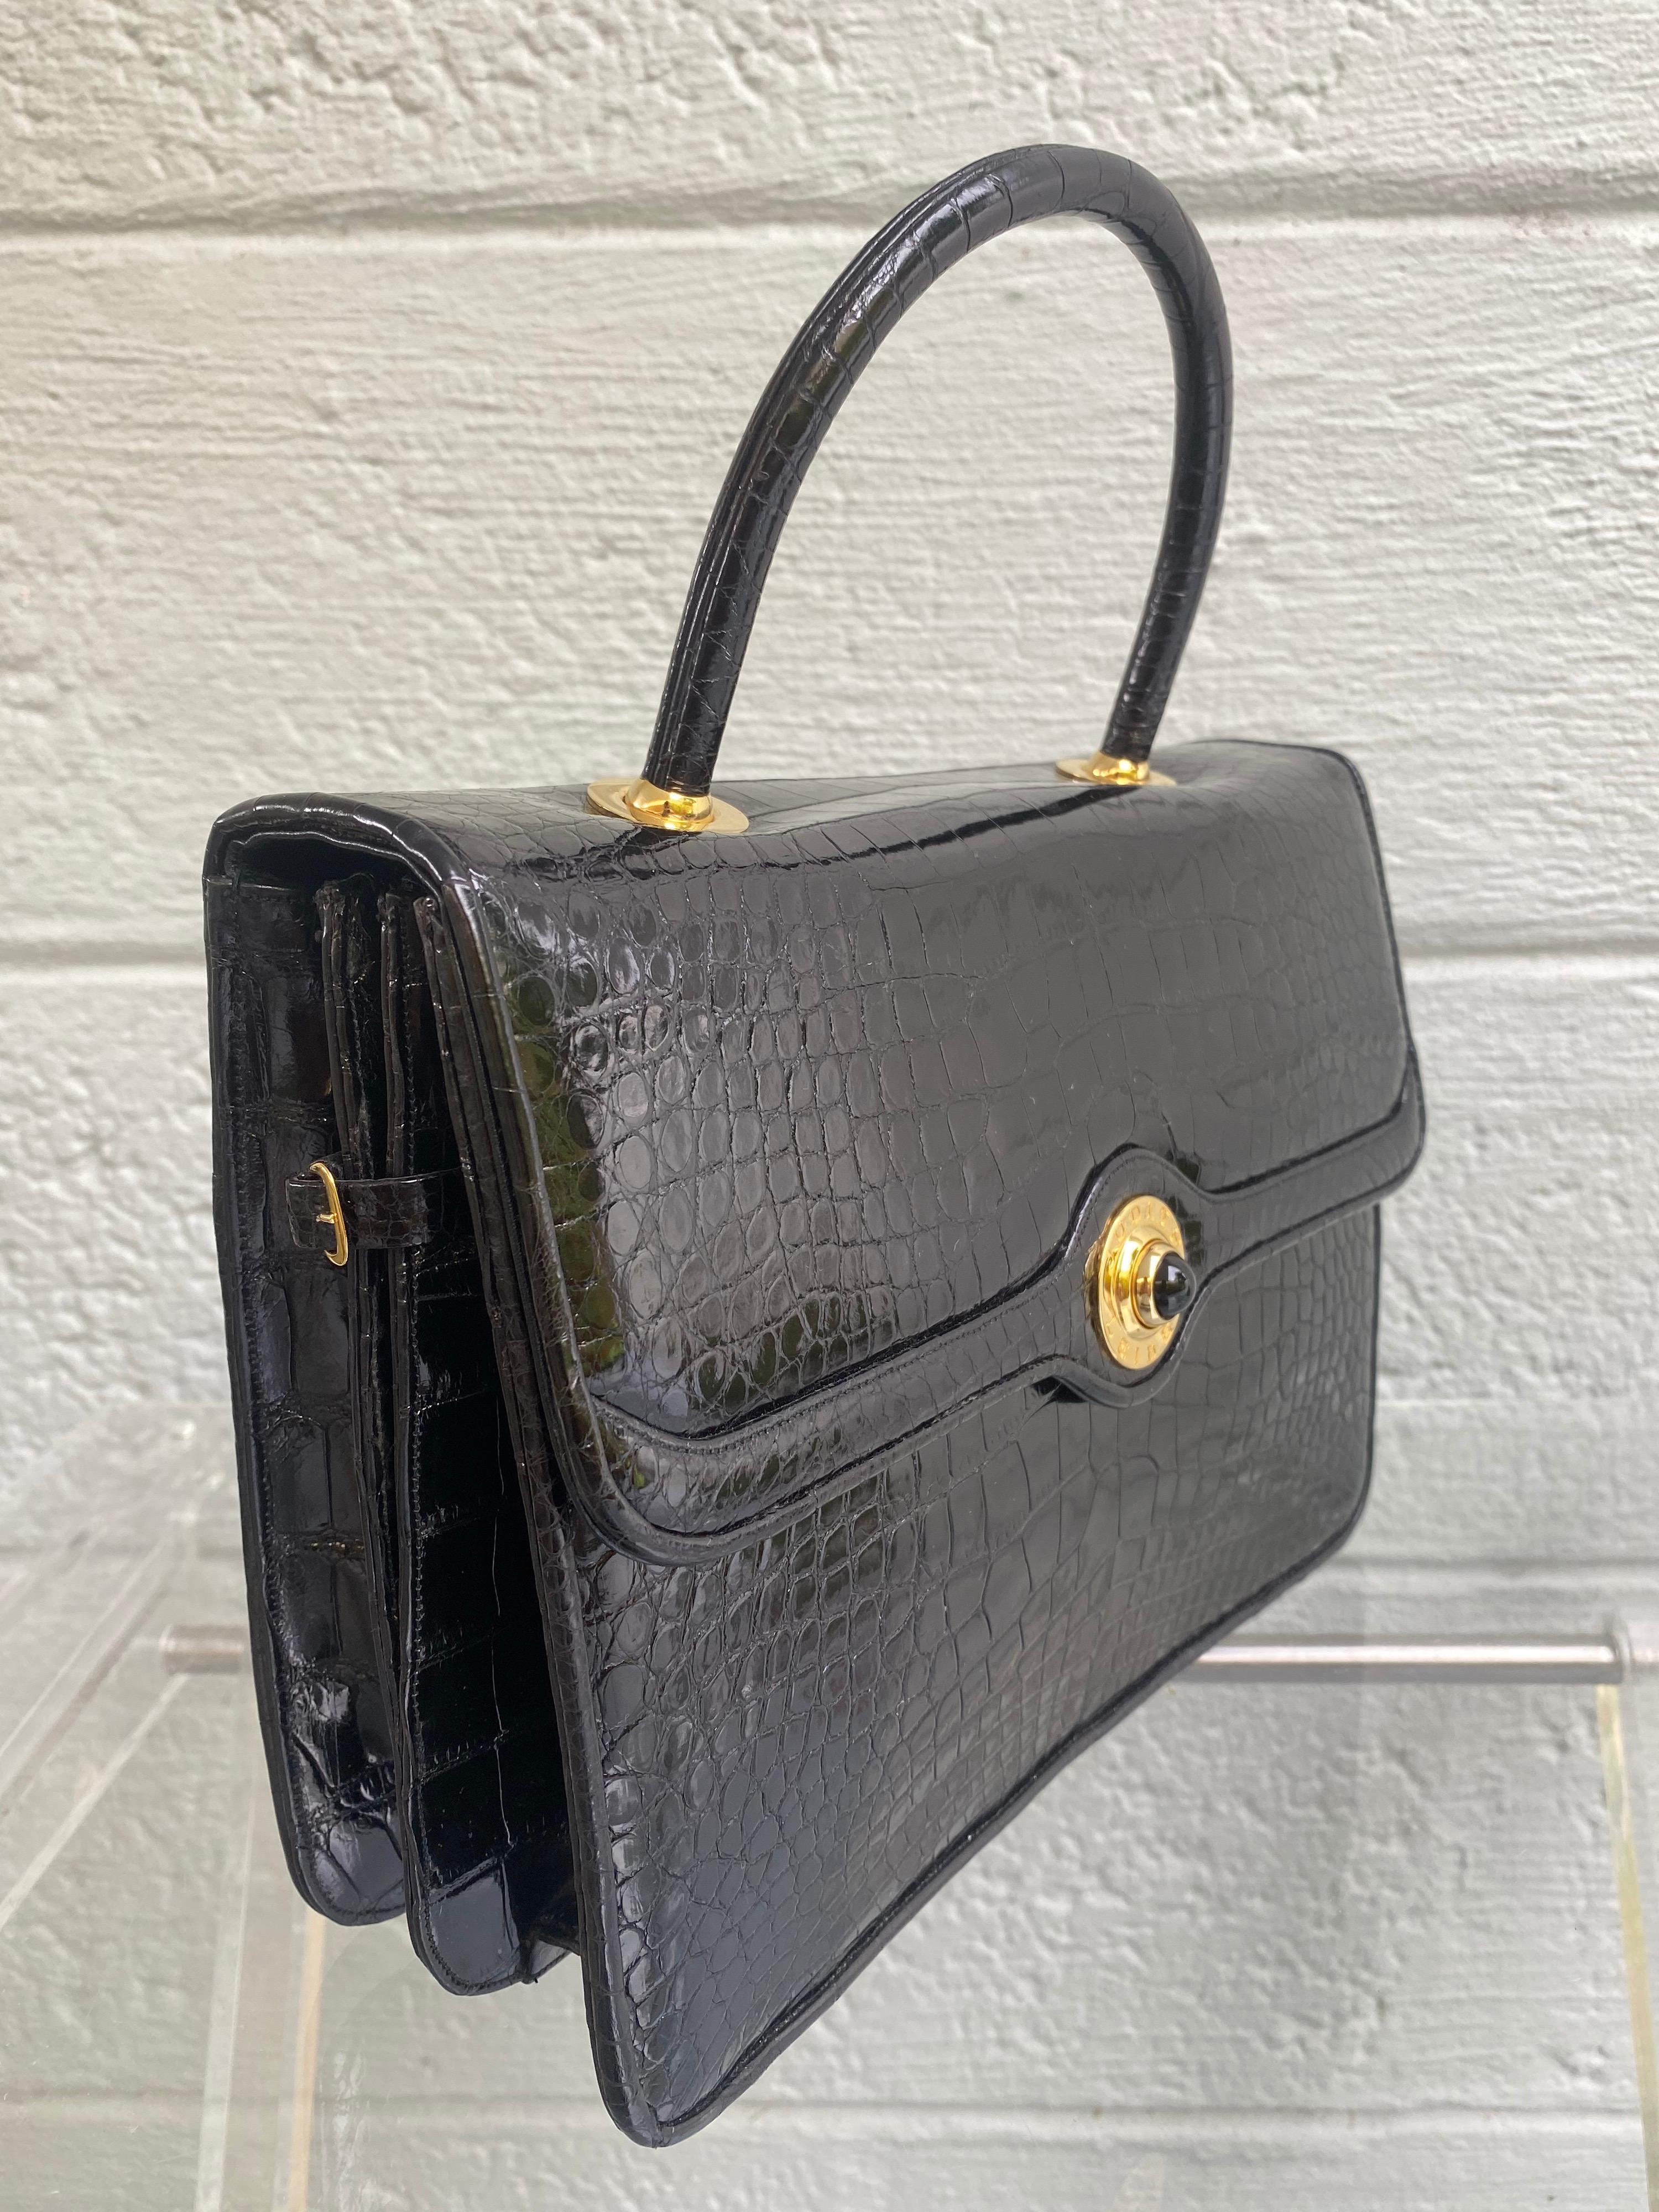 The Vintage Kelly Flap style Alligator bag from Judith Leiber is one of the famed luxury goods house's most coveted and exclusive items. This flap bag is bathed glazed black glossy alligator. Judith Leiber is engraved in gold. Goatskin black leather